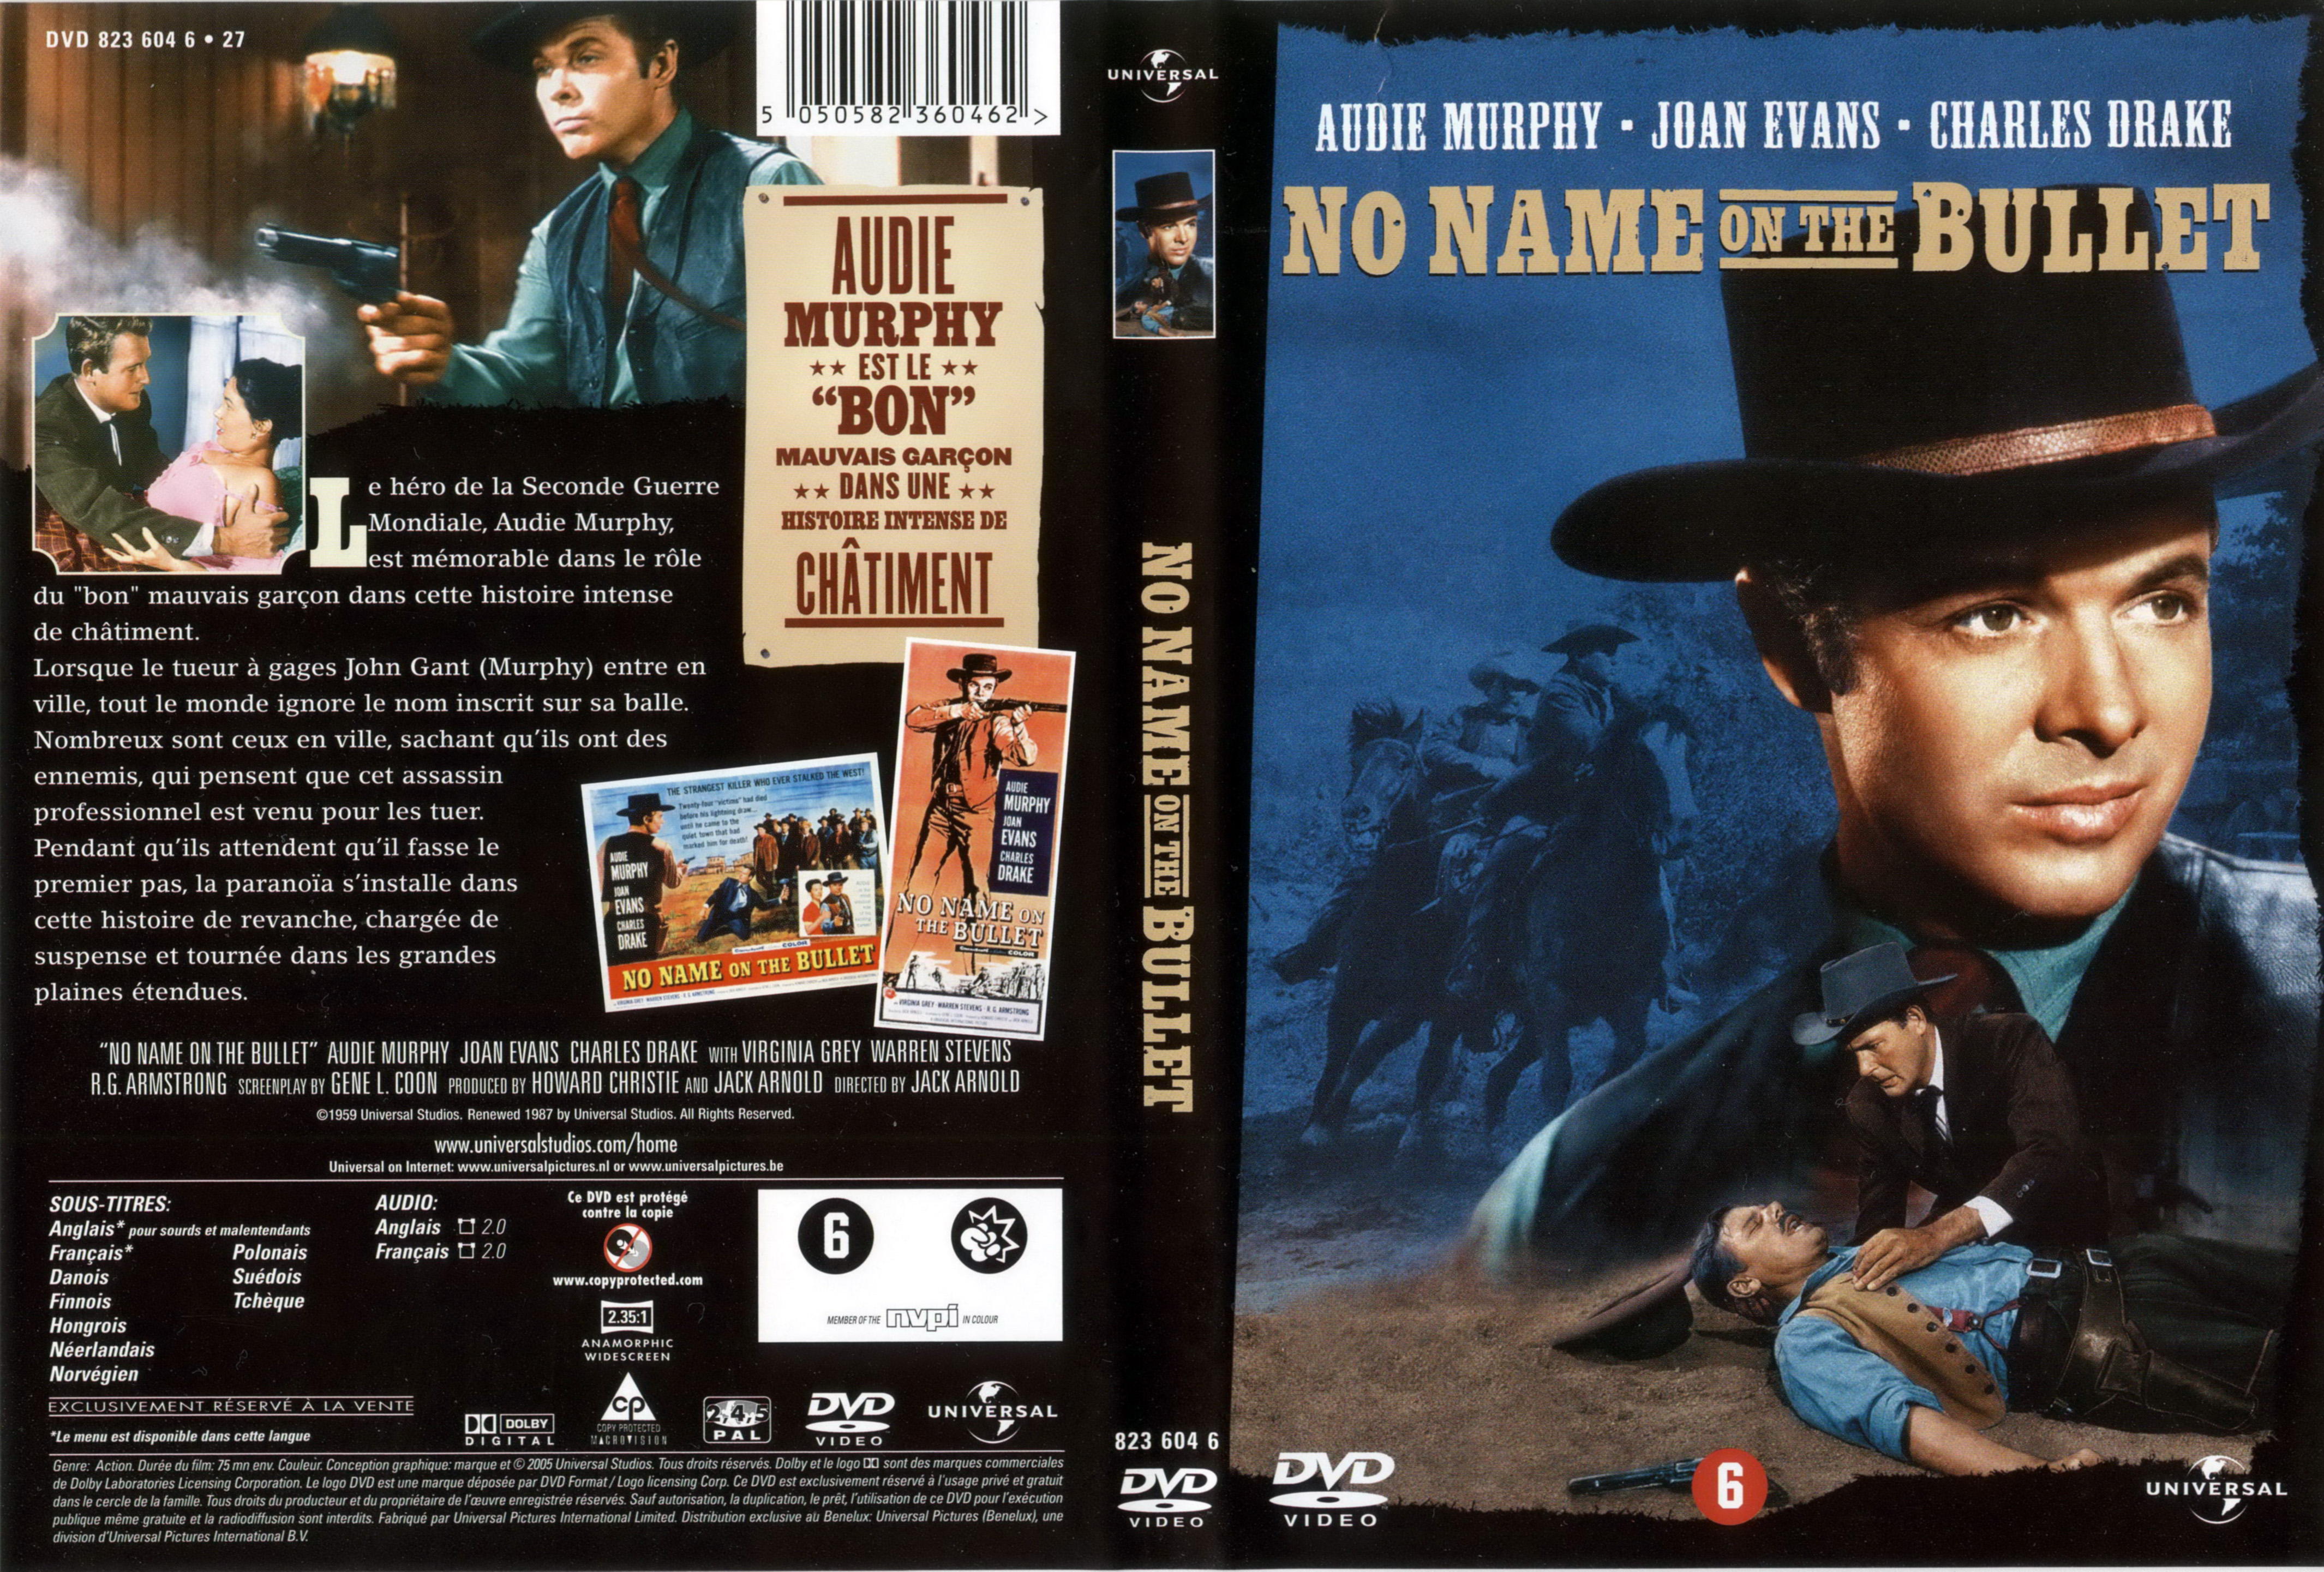 Jaquette DVD No name on the bullet v2